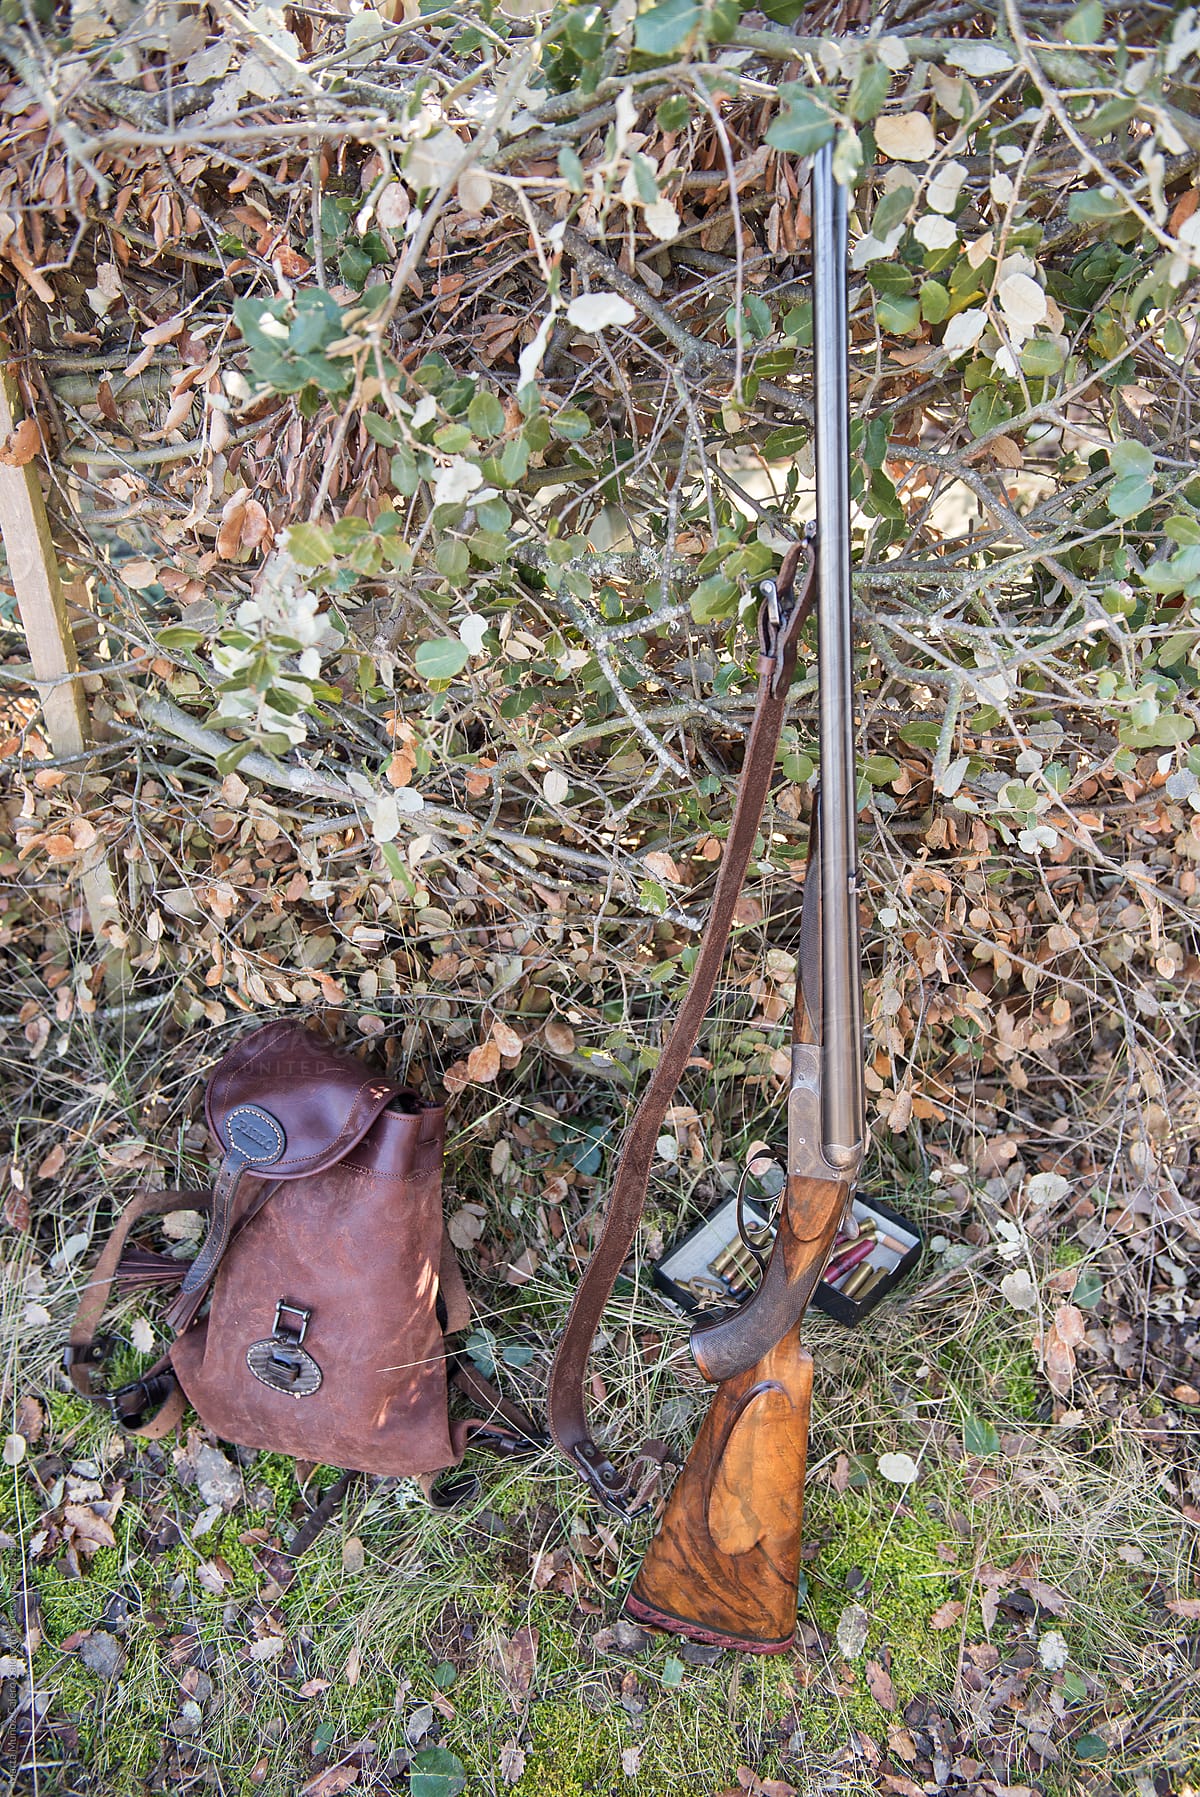 Rifle and rucksack in a hunting spot